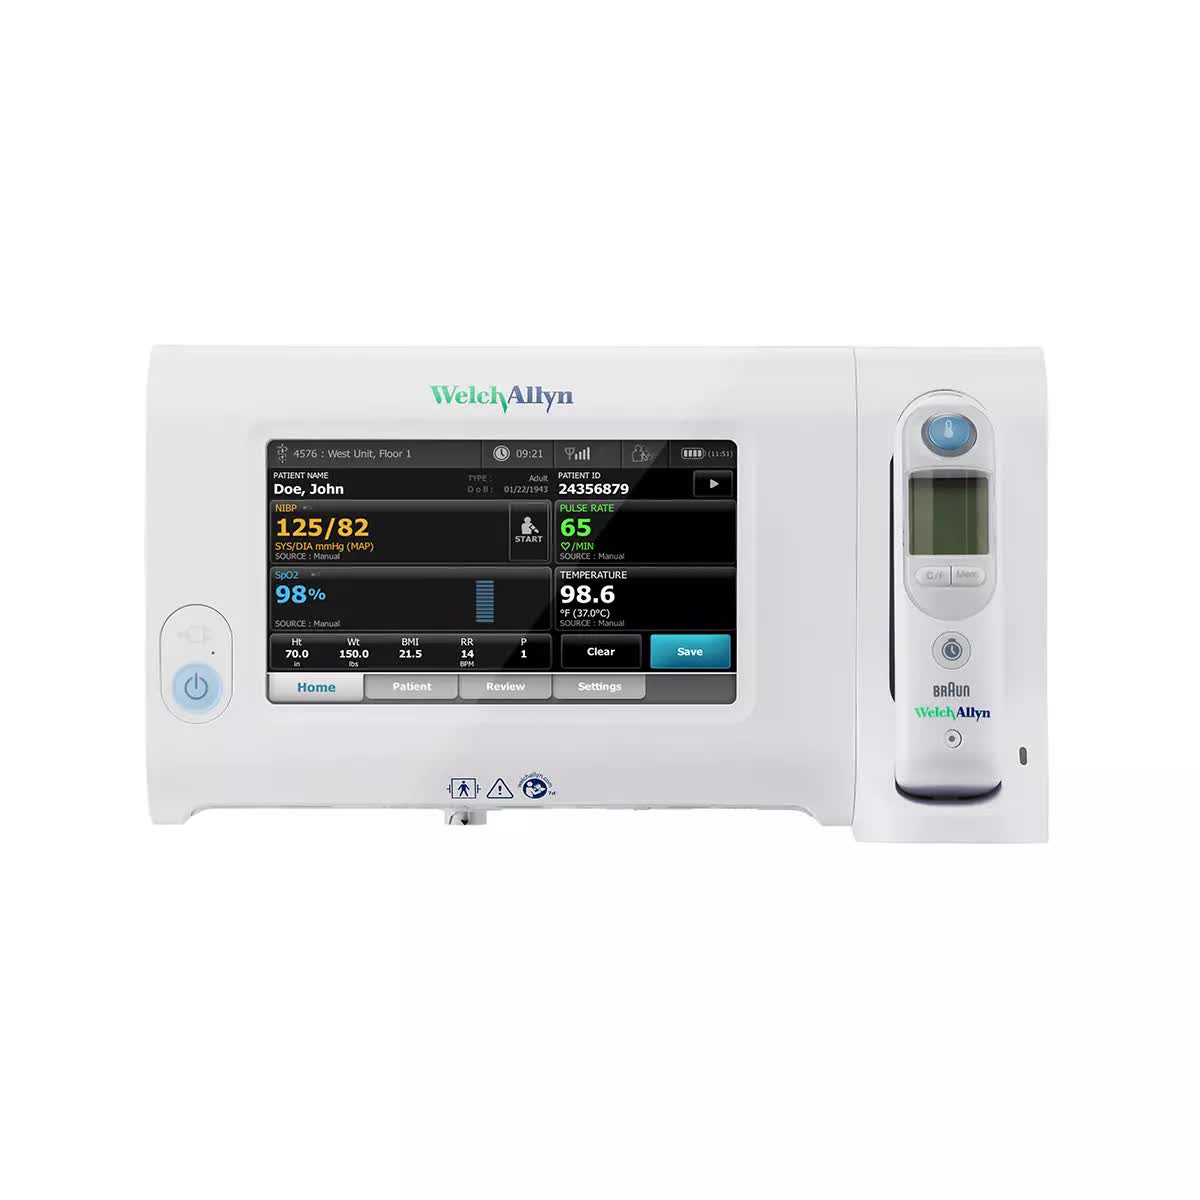 Welch Allyn Connex 7300 Bluetooth Connectivity Spot Monitor with Nellcor SpO2 and SureTemp Plus